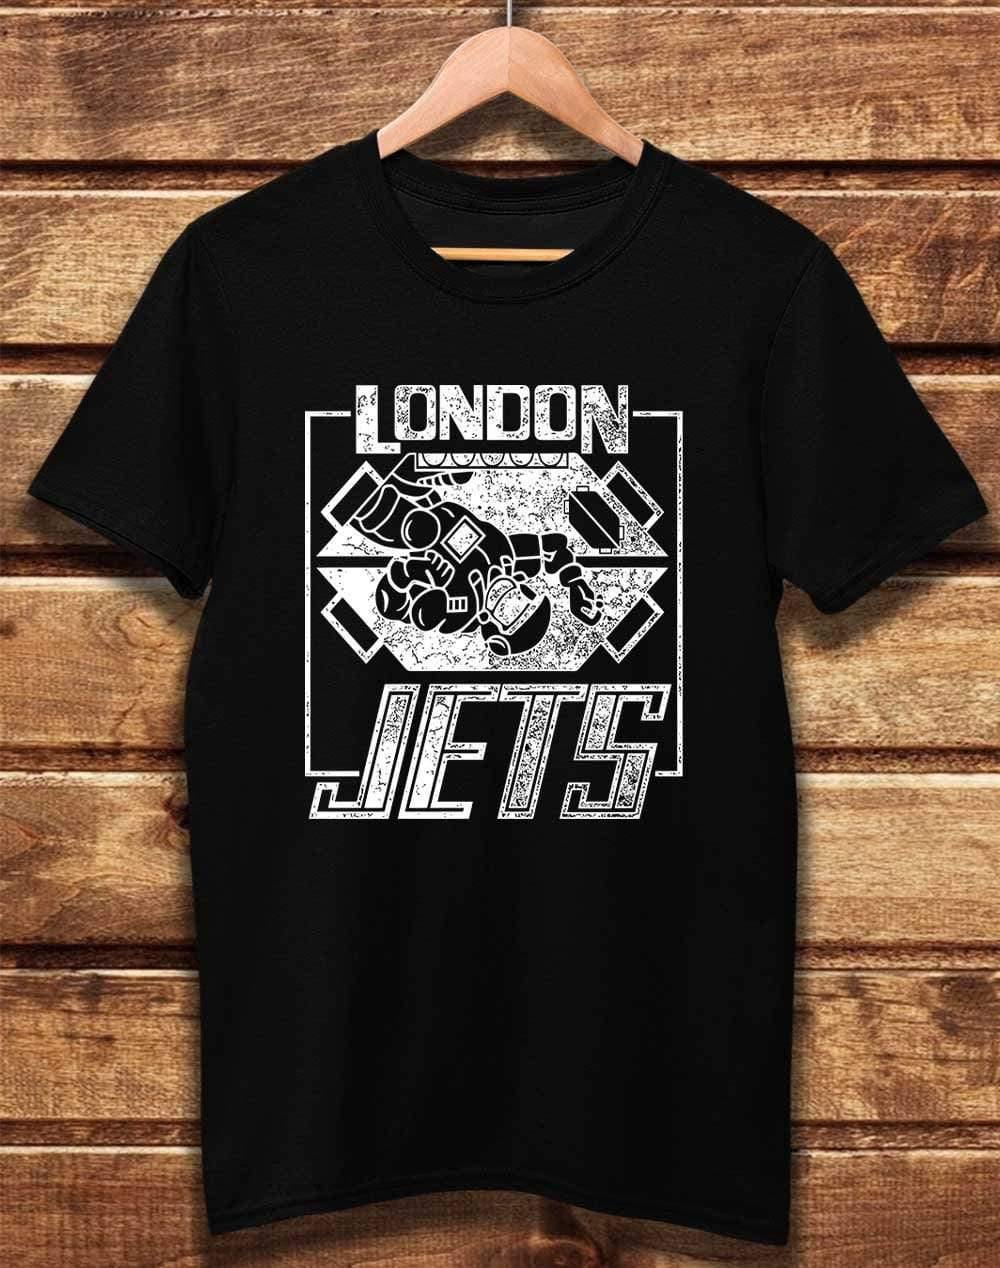 DELUXE London Jets Organic Cotton T-Shirt XS / Black  - Off World Tees